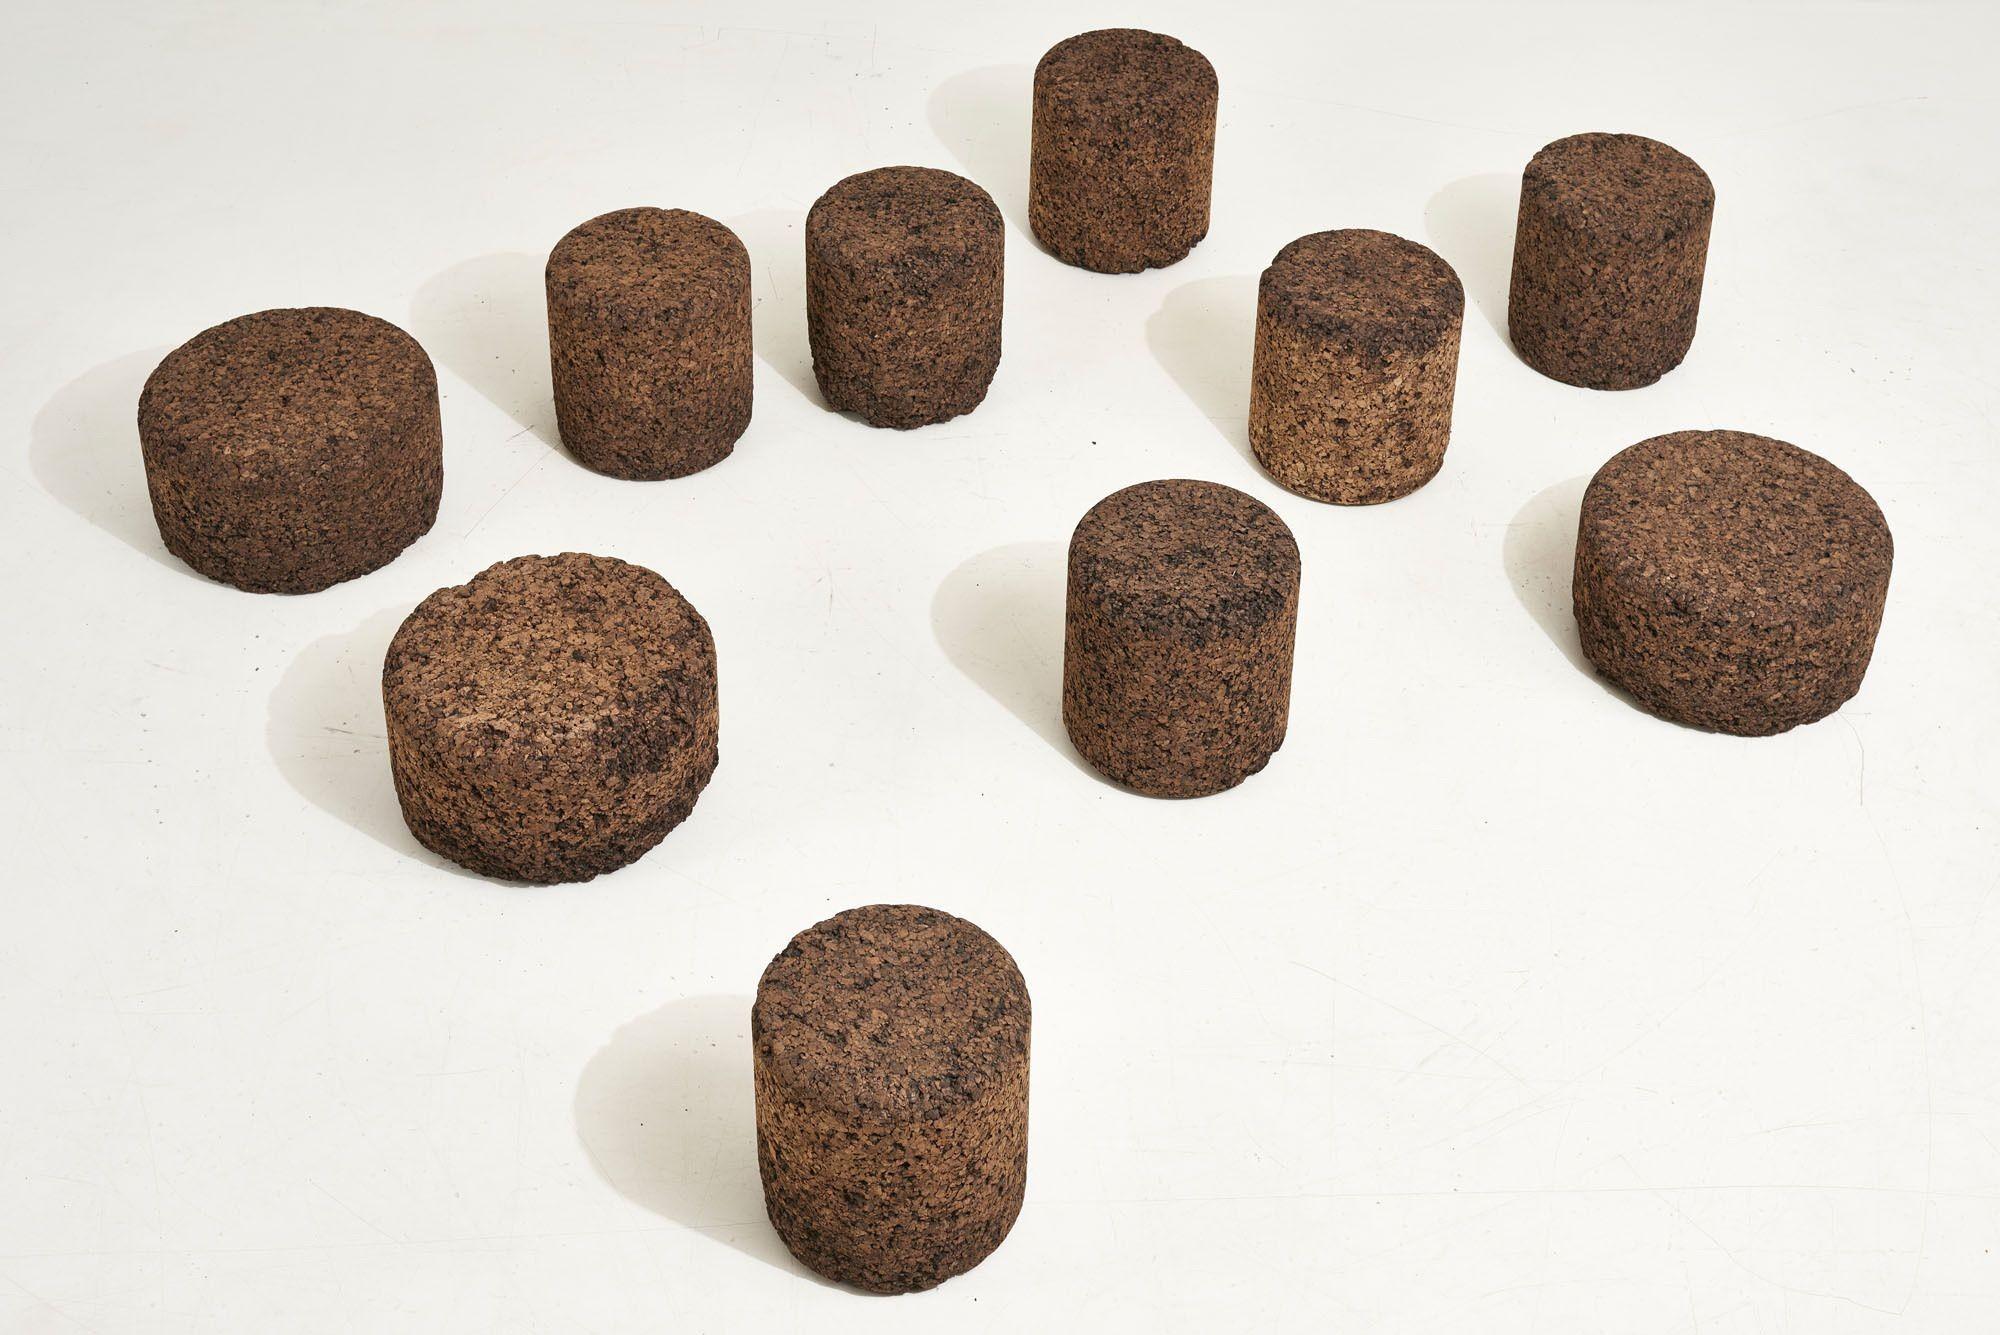 Jasper Morrison Set of 10 Cork Stools by Moooi, 2002. As you can see in pics there are a few stools where some small areas of cork has come off. 7 stools measure 13.5